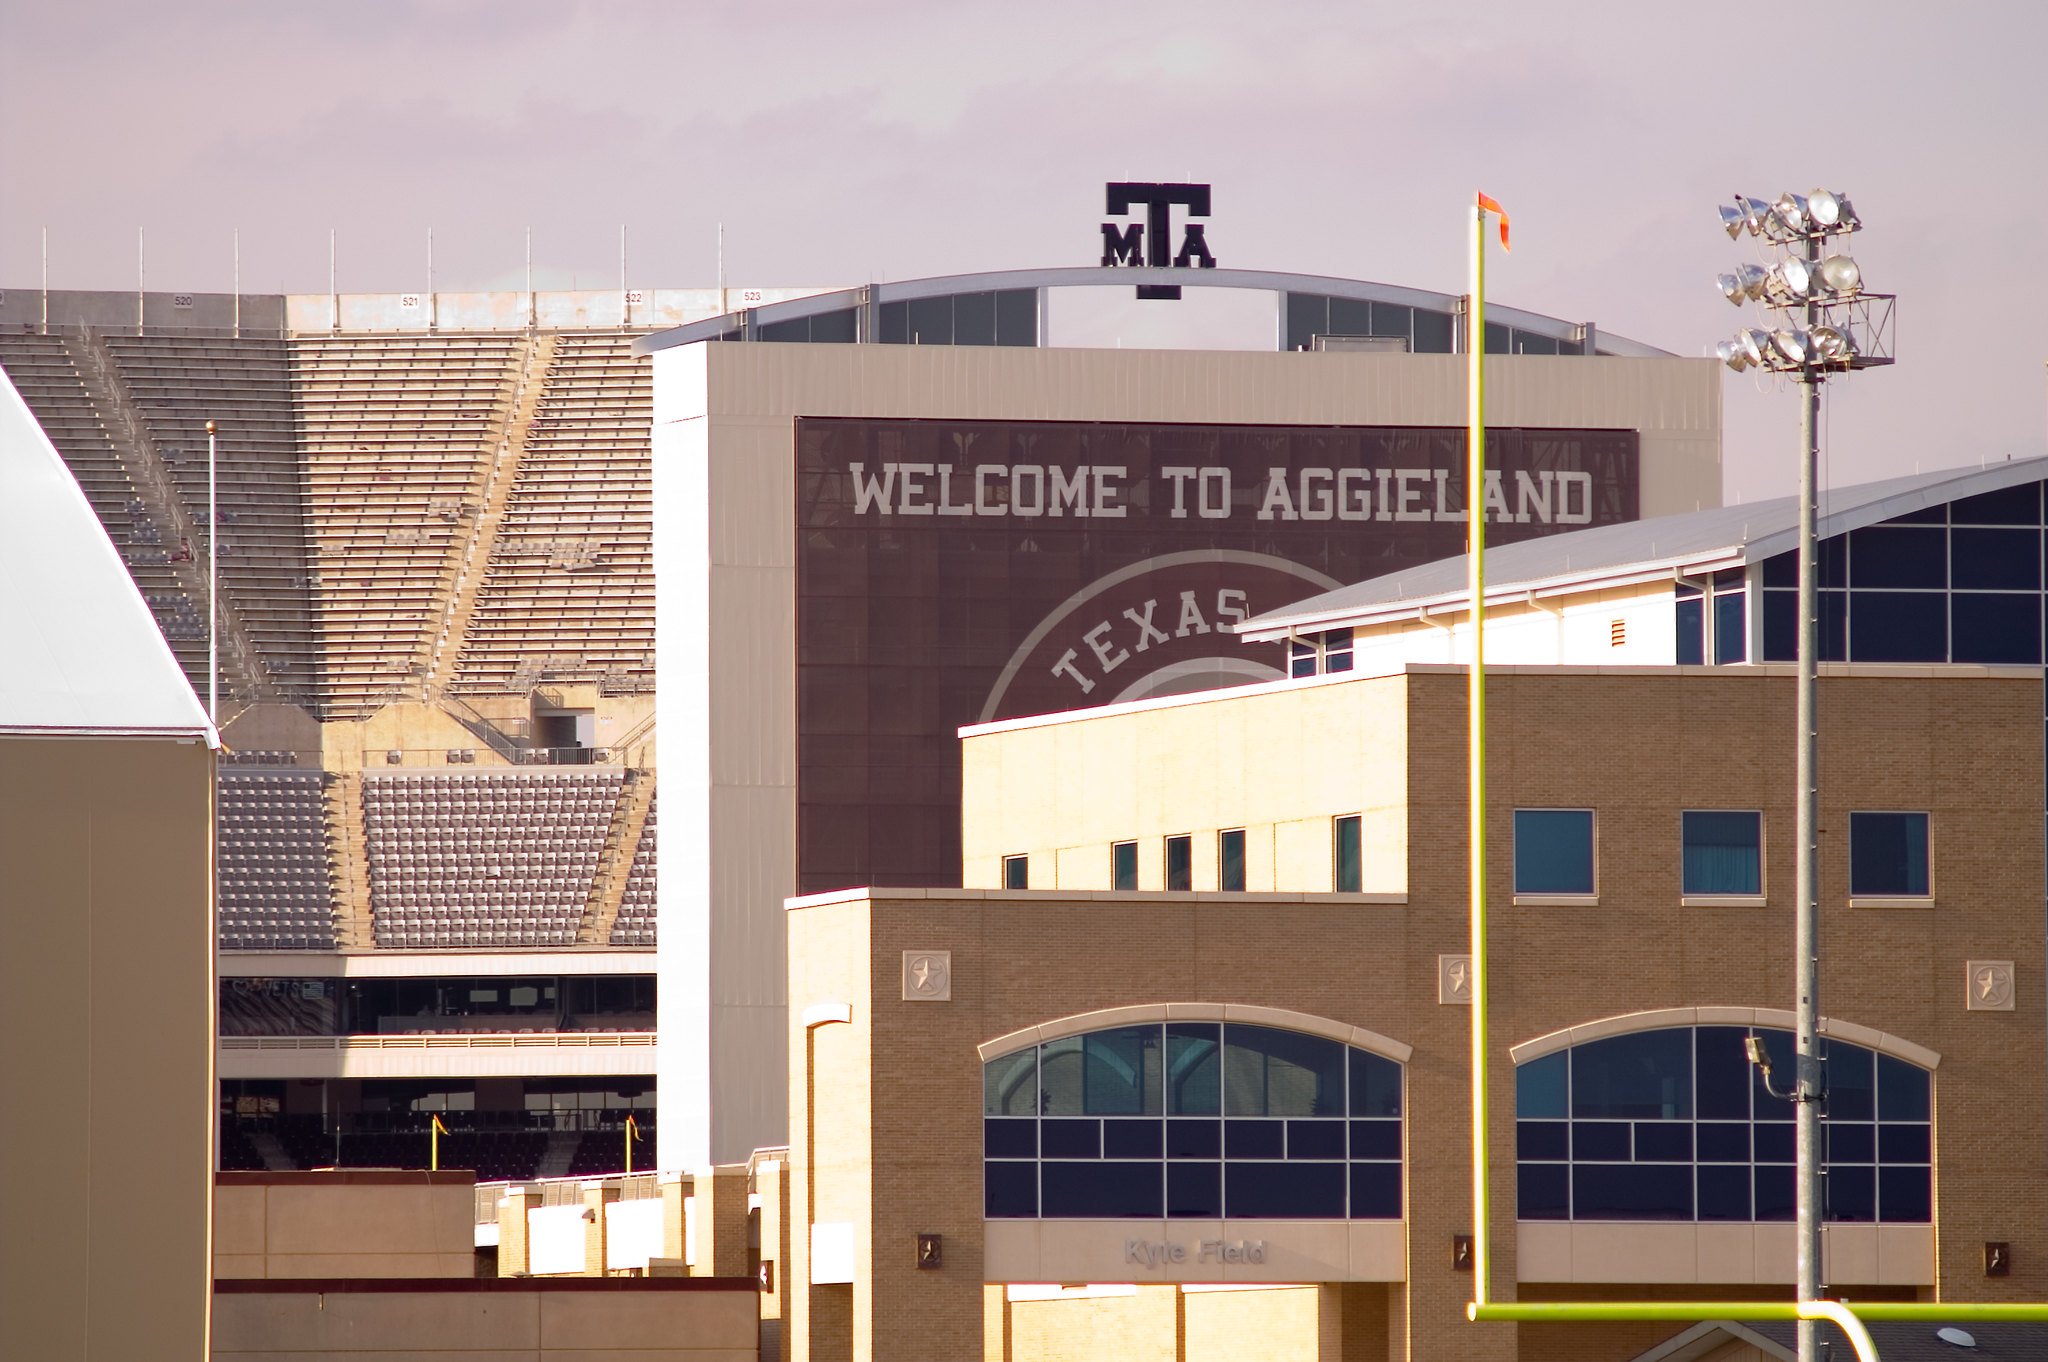 An image of Texas A&M University with a building emblazoned with the phrase "Welcome to Aggieland"